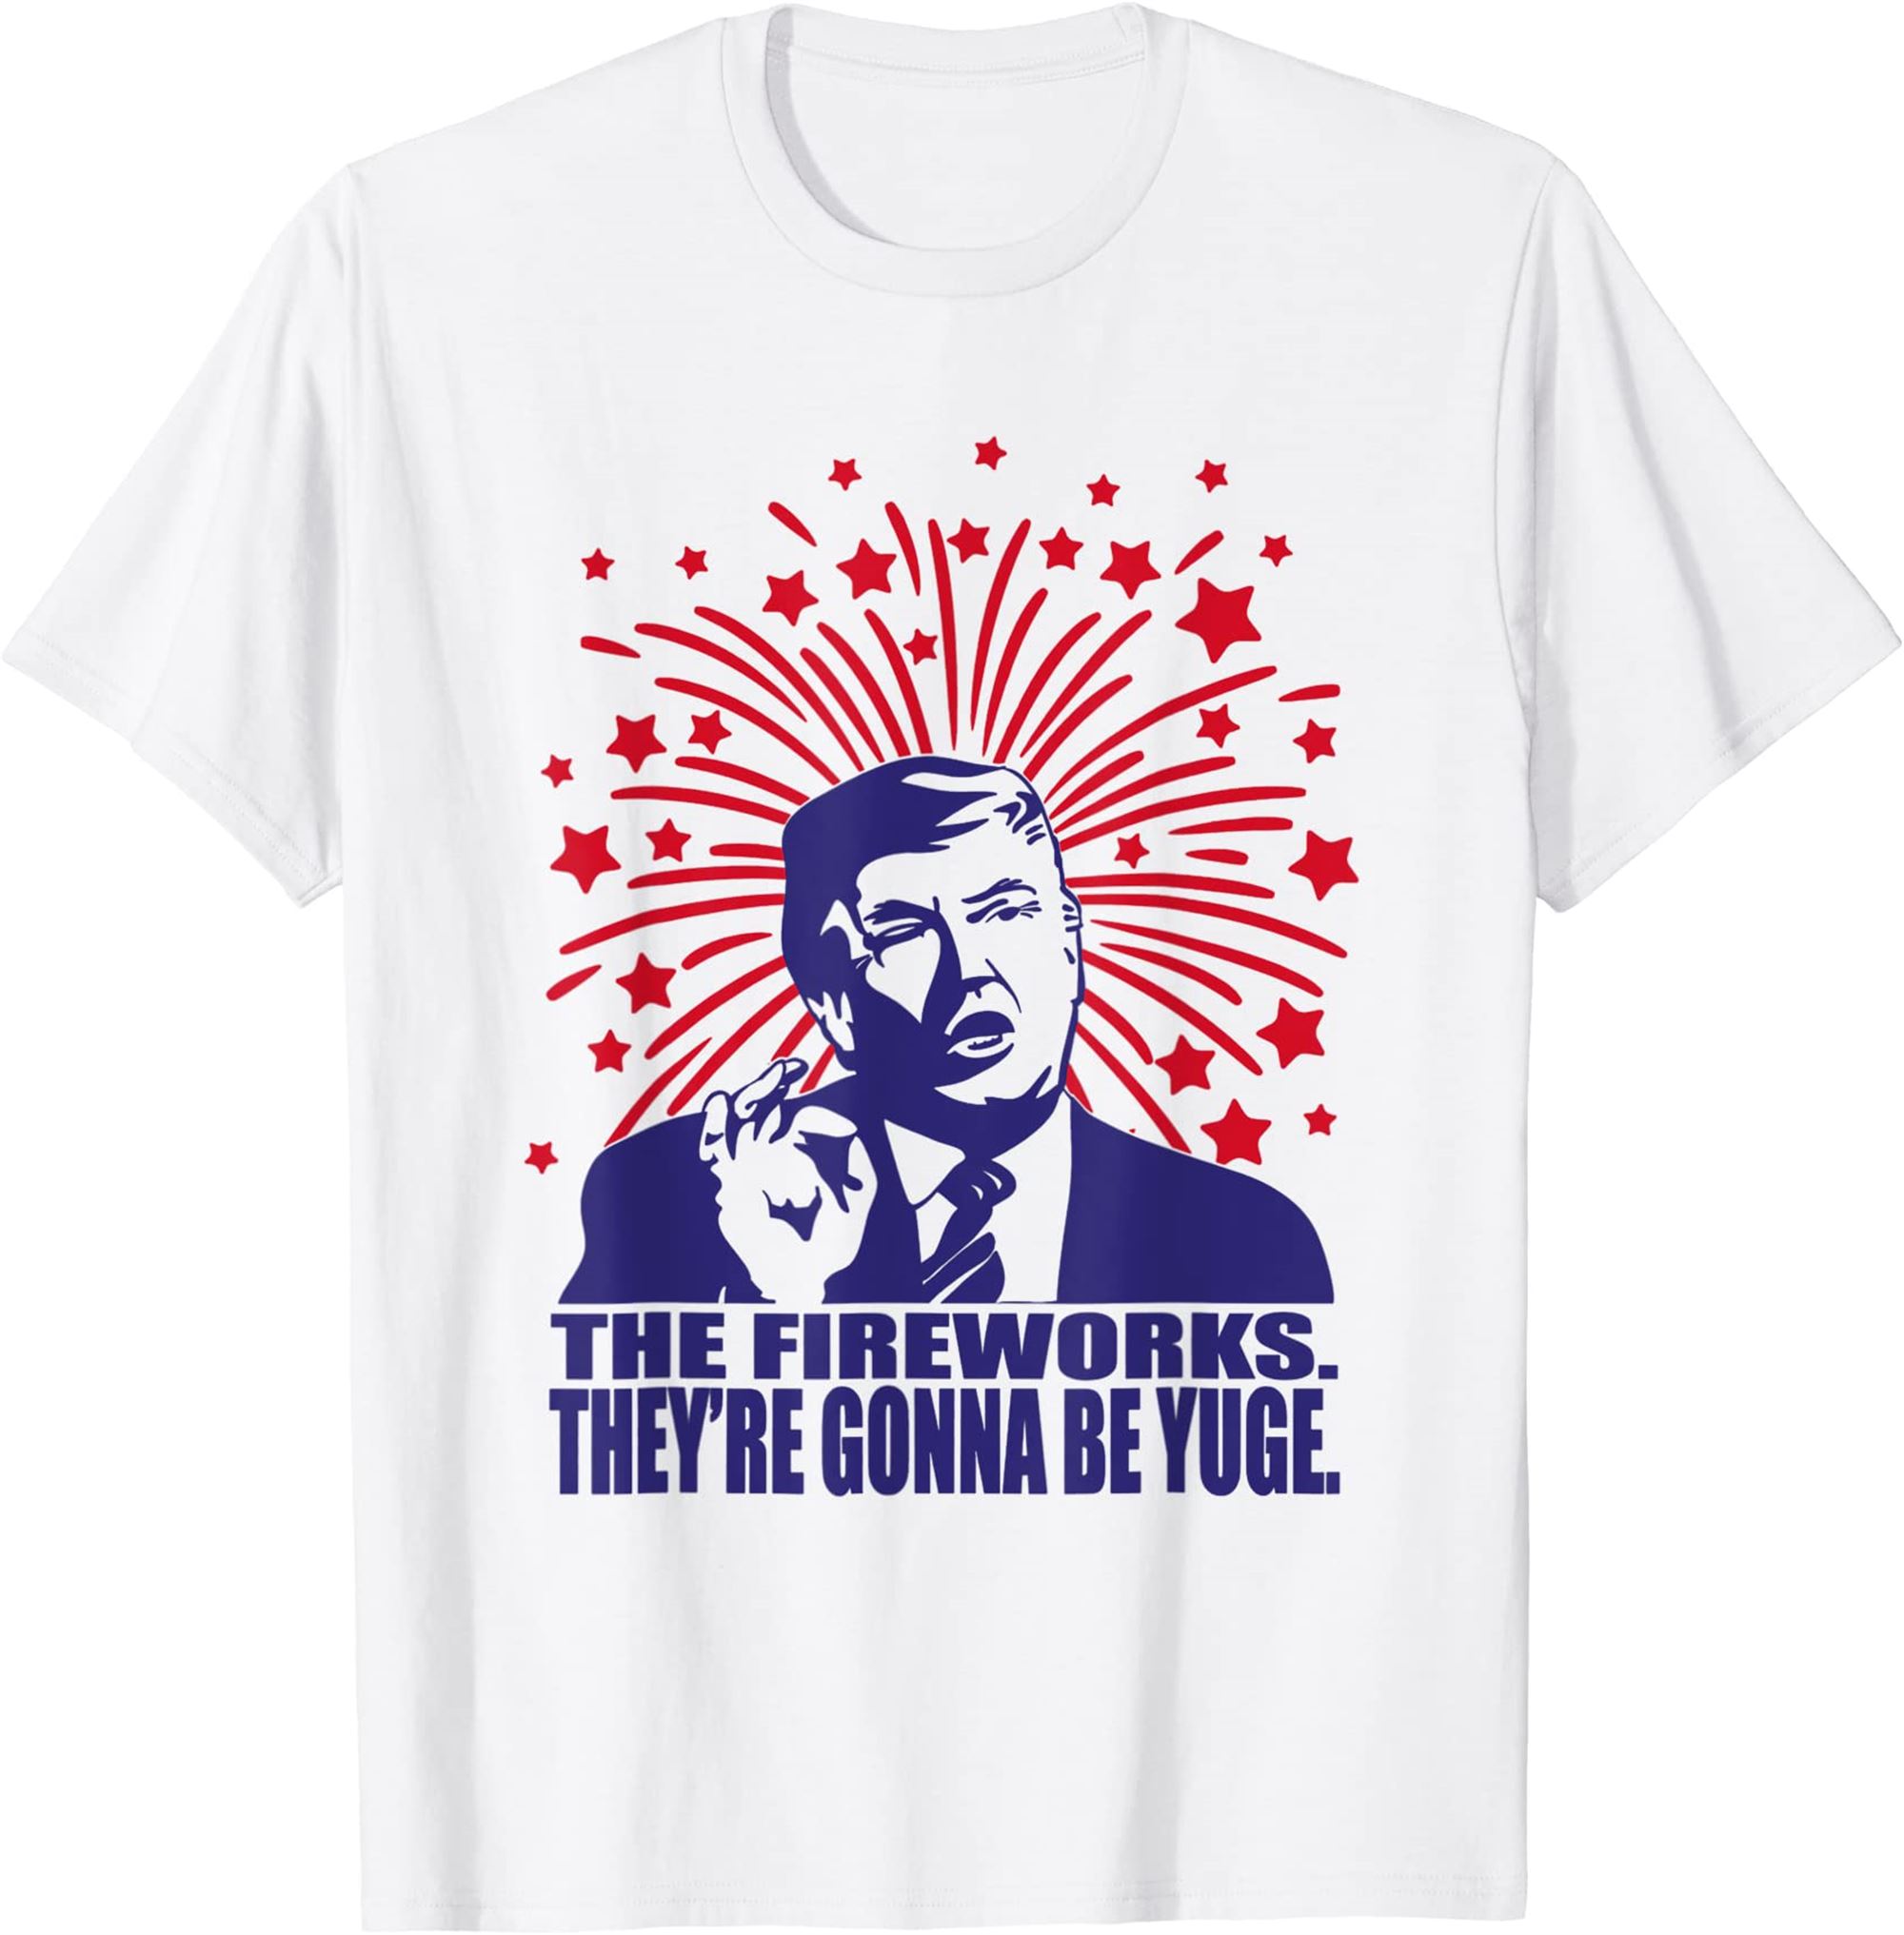 The Fireworks Gonna Be Yuge Funny Trump 4th Of July T-shirt Plus Size Up To 5xl